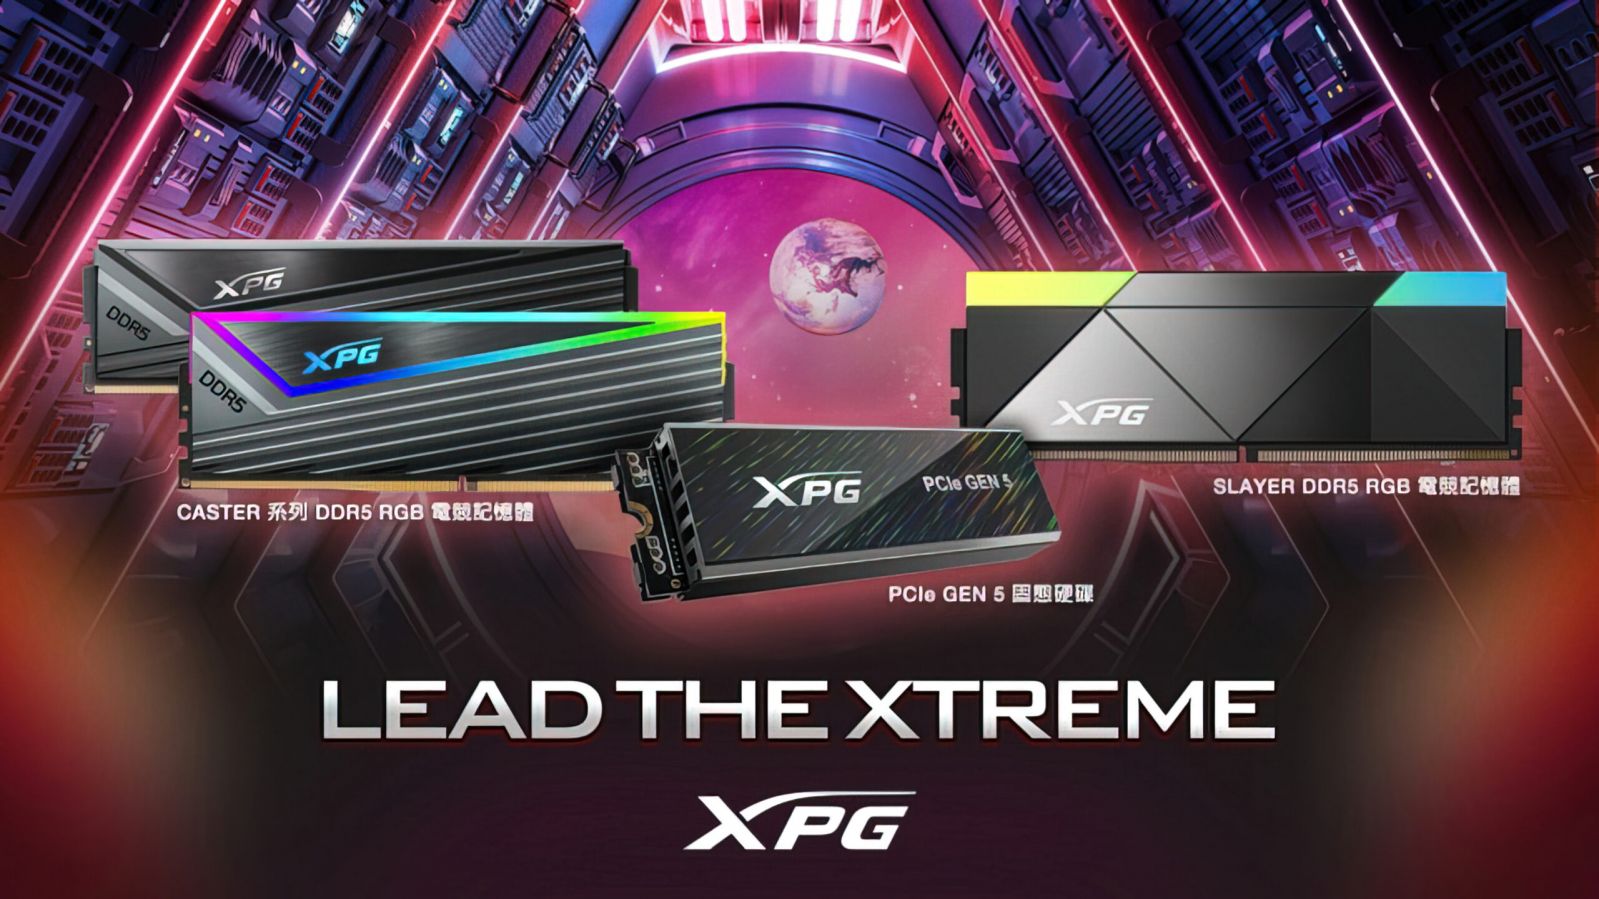 ADATA-XPG-Meraverse-Campaign-PCIe-Gen-5-SSD-DDR5-7000-Memory-low_res-scale-6_00x-scaled.jpg